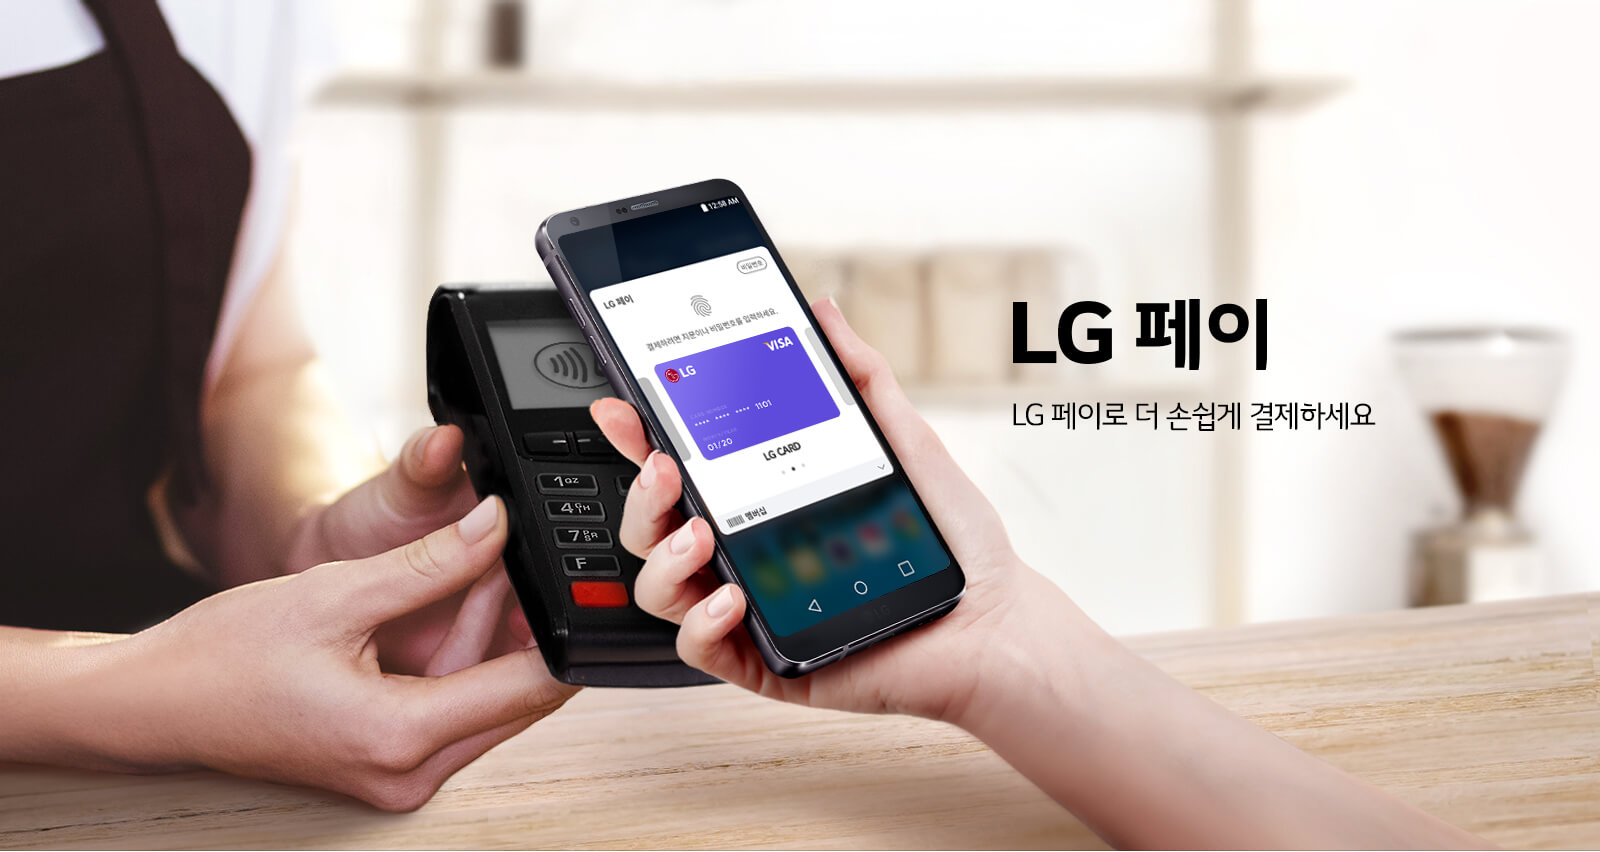 LG Pay will make its debut in the US by H2 this year 2